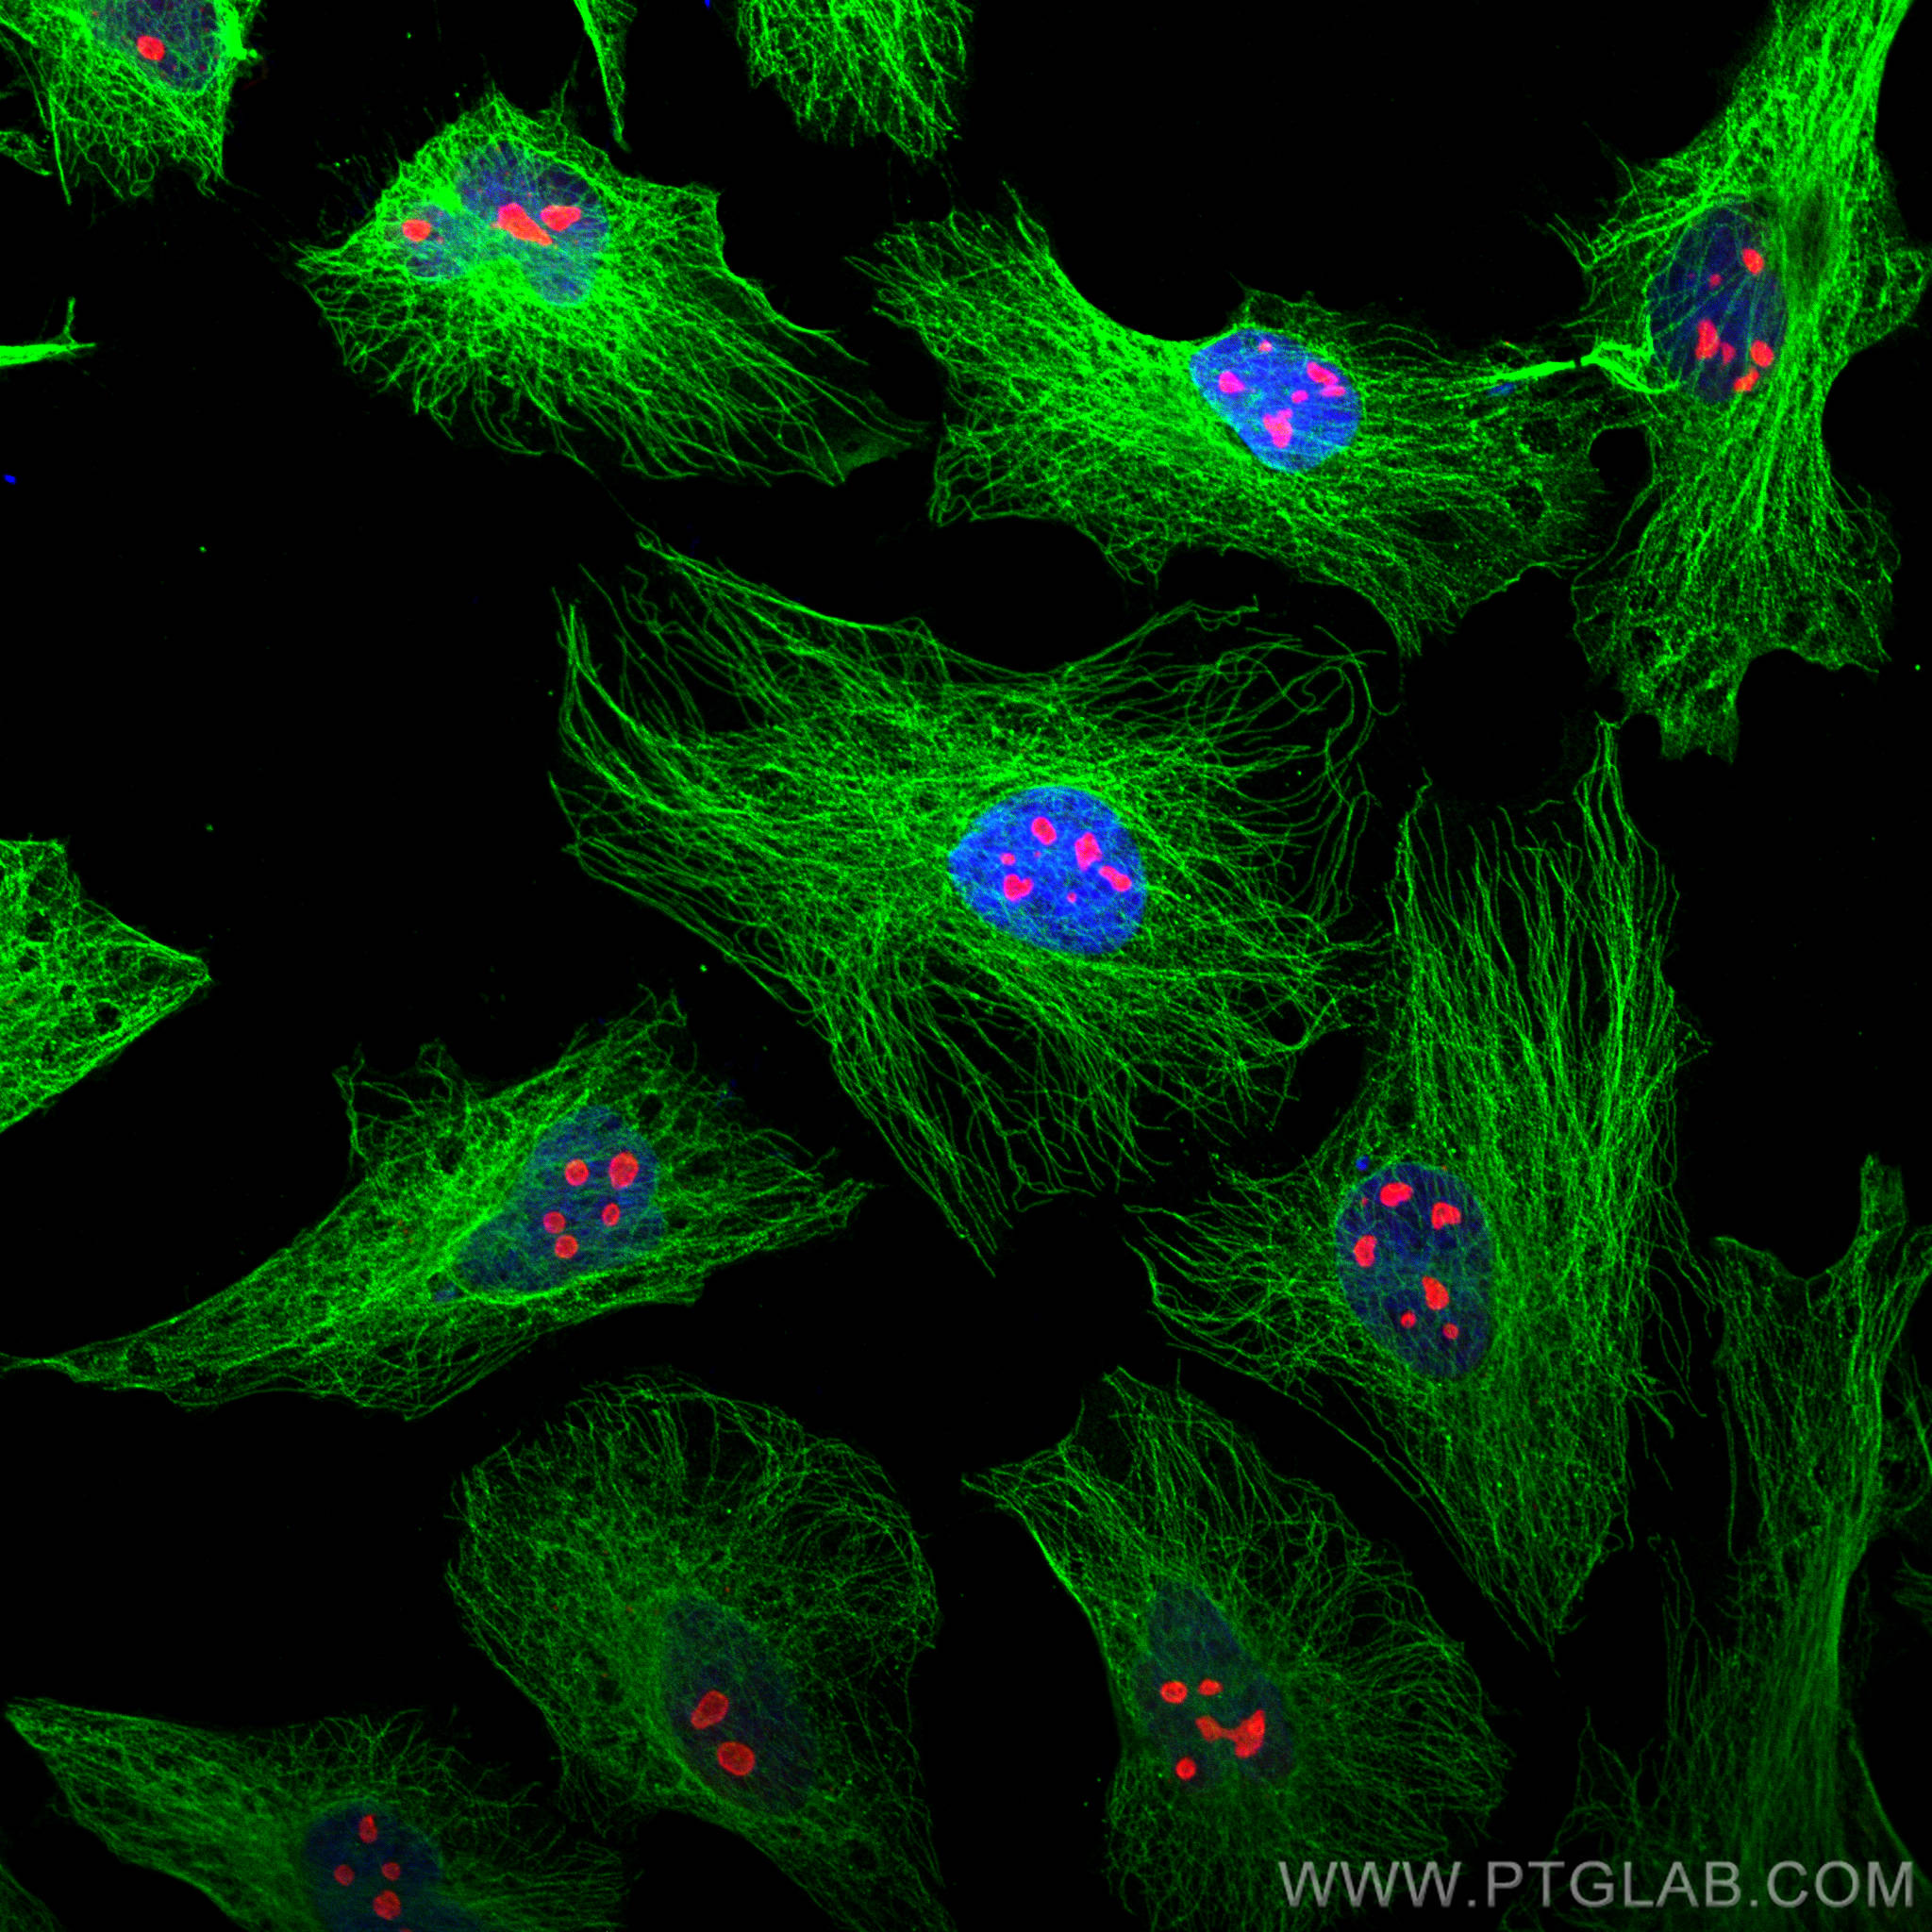 Immunofluorescence of Hela cells: Hela cells were fixed with 4% PFA and stained with Rabbit anti-Alpha Tubulin polyclonal antibody (11224-1-AP, 1:200, green) and mouse anti-NPM1 monoclonal antibody (60096-1-Ig, 1:1000, red). Multi-rAb CoraLite® Plus 488-Goat Anti-Rabbit Recombinant Secondary Antibody (H+L) (RGAR002, 1:500) and Multi-rAb CoraLite® Plus 594-Goat Anti-Mouse Recombinant Secondary Antibody (H+L) (RGAM004, 1:500) were used for detection. 